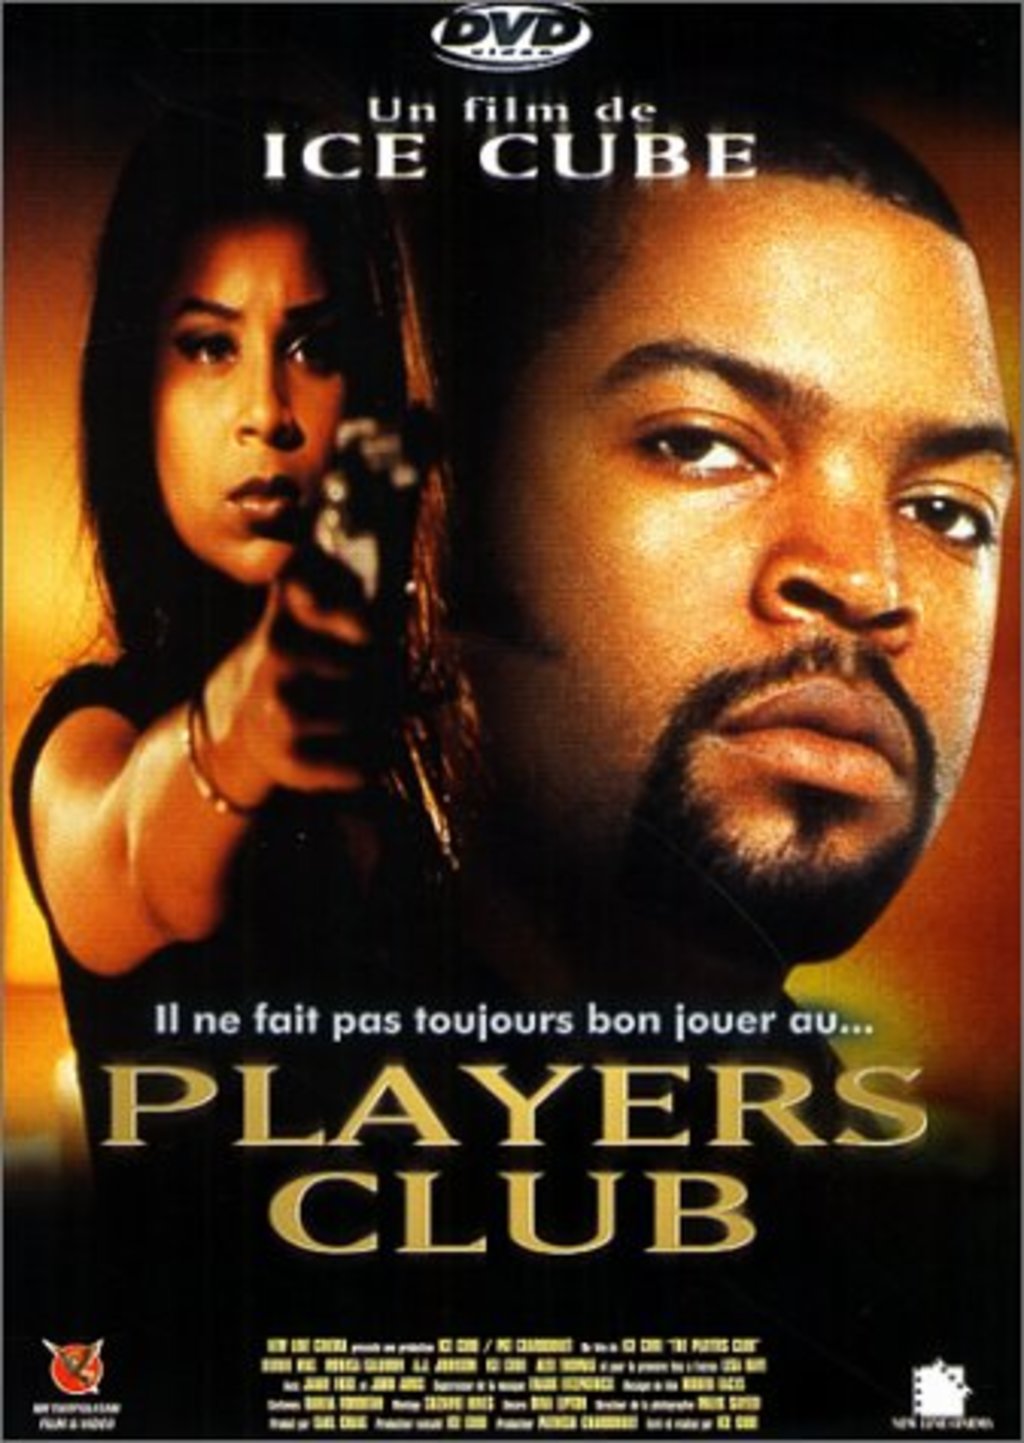 Watch The Players Club On Netflix Today